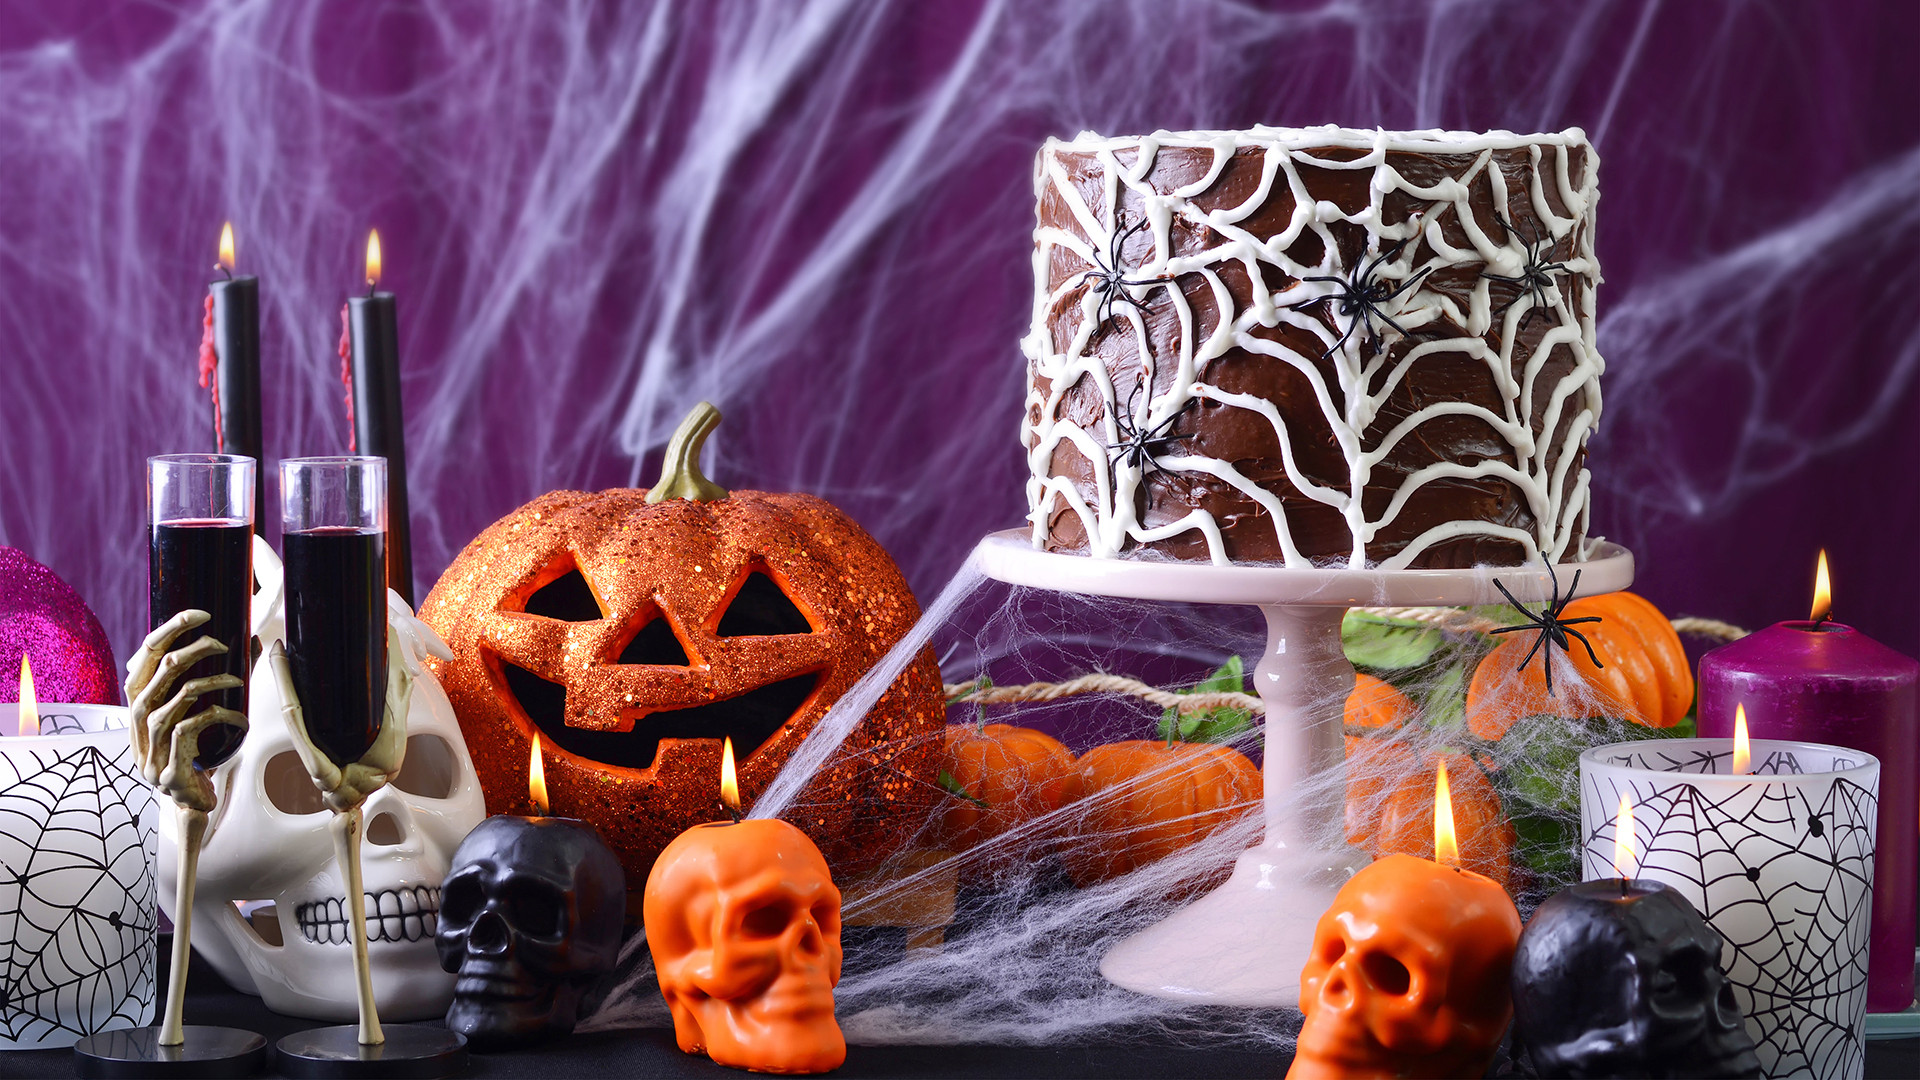 Halloween Ideas For Party
 Easy DIY decorations for your Halloween party TODAY